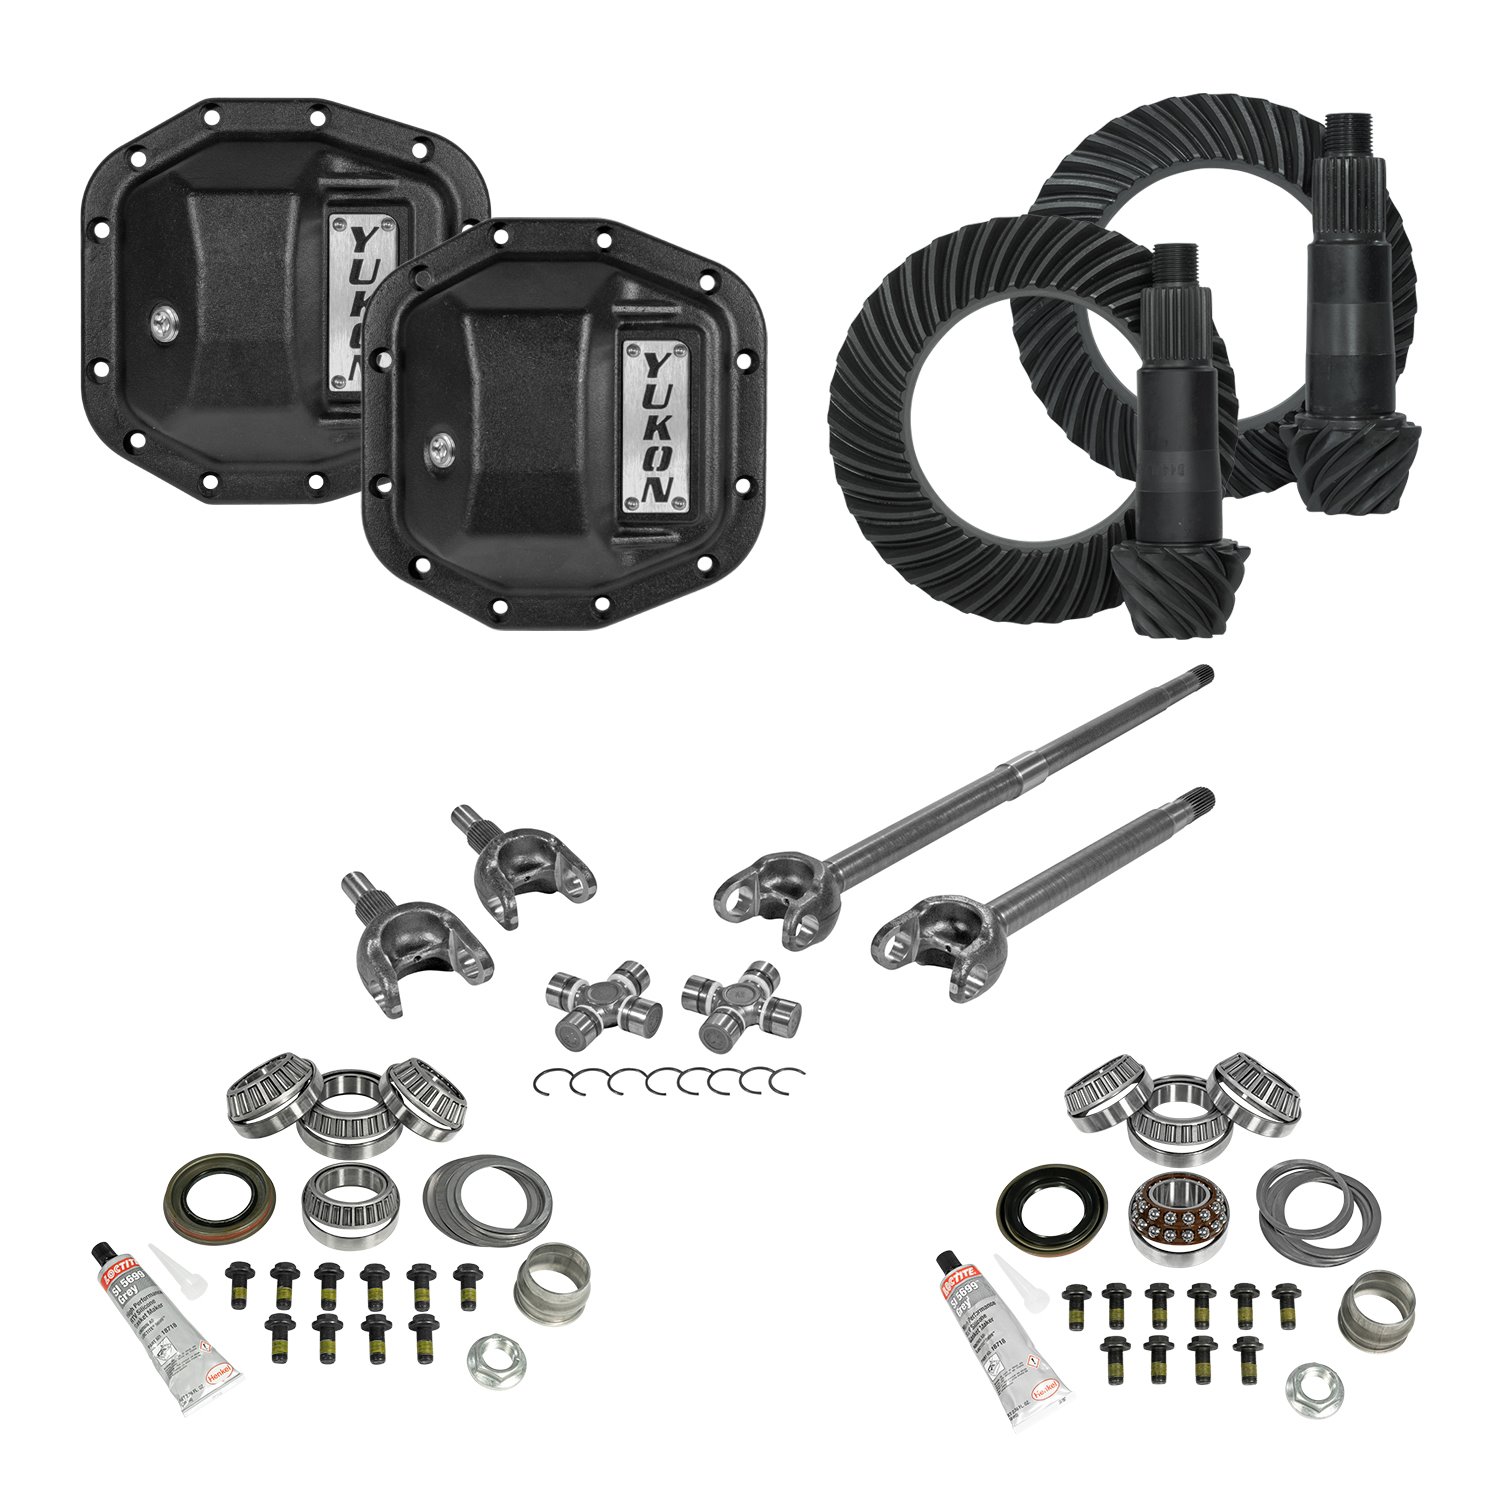 Stage 3 Jeep Jl Re-Gear Kit W/Covers, Front Axles, Dana 30/35, 5.13 Ratio